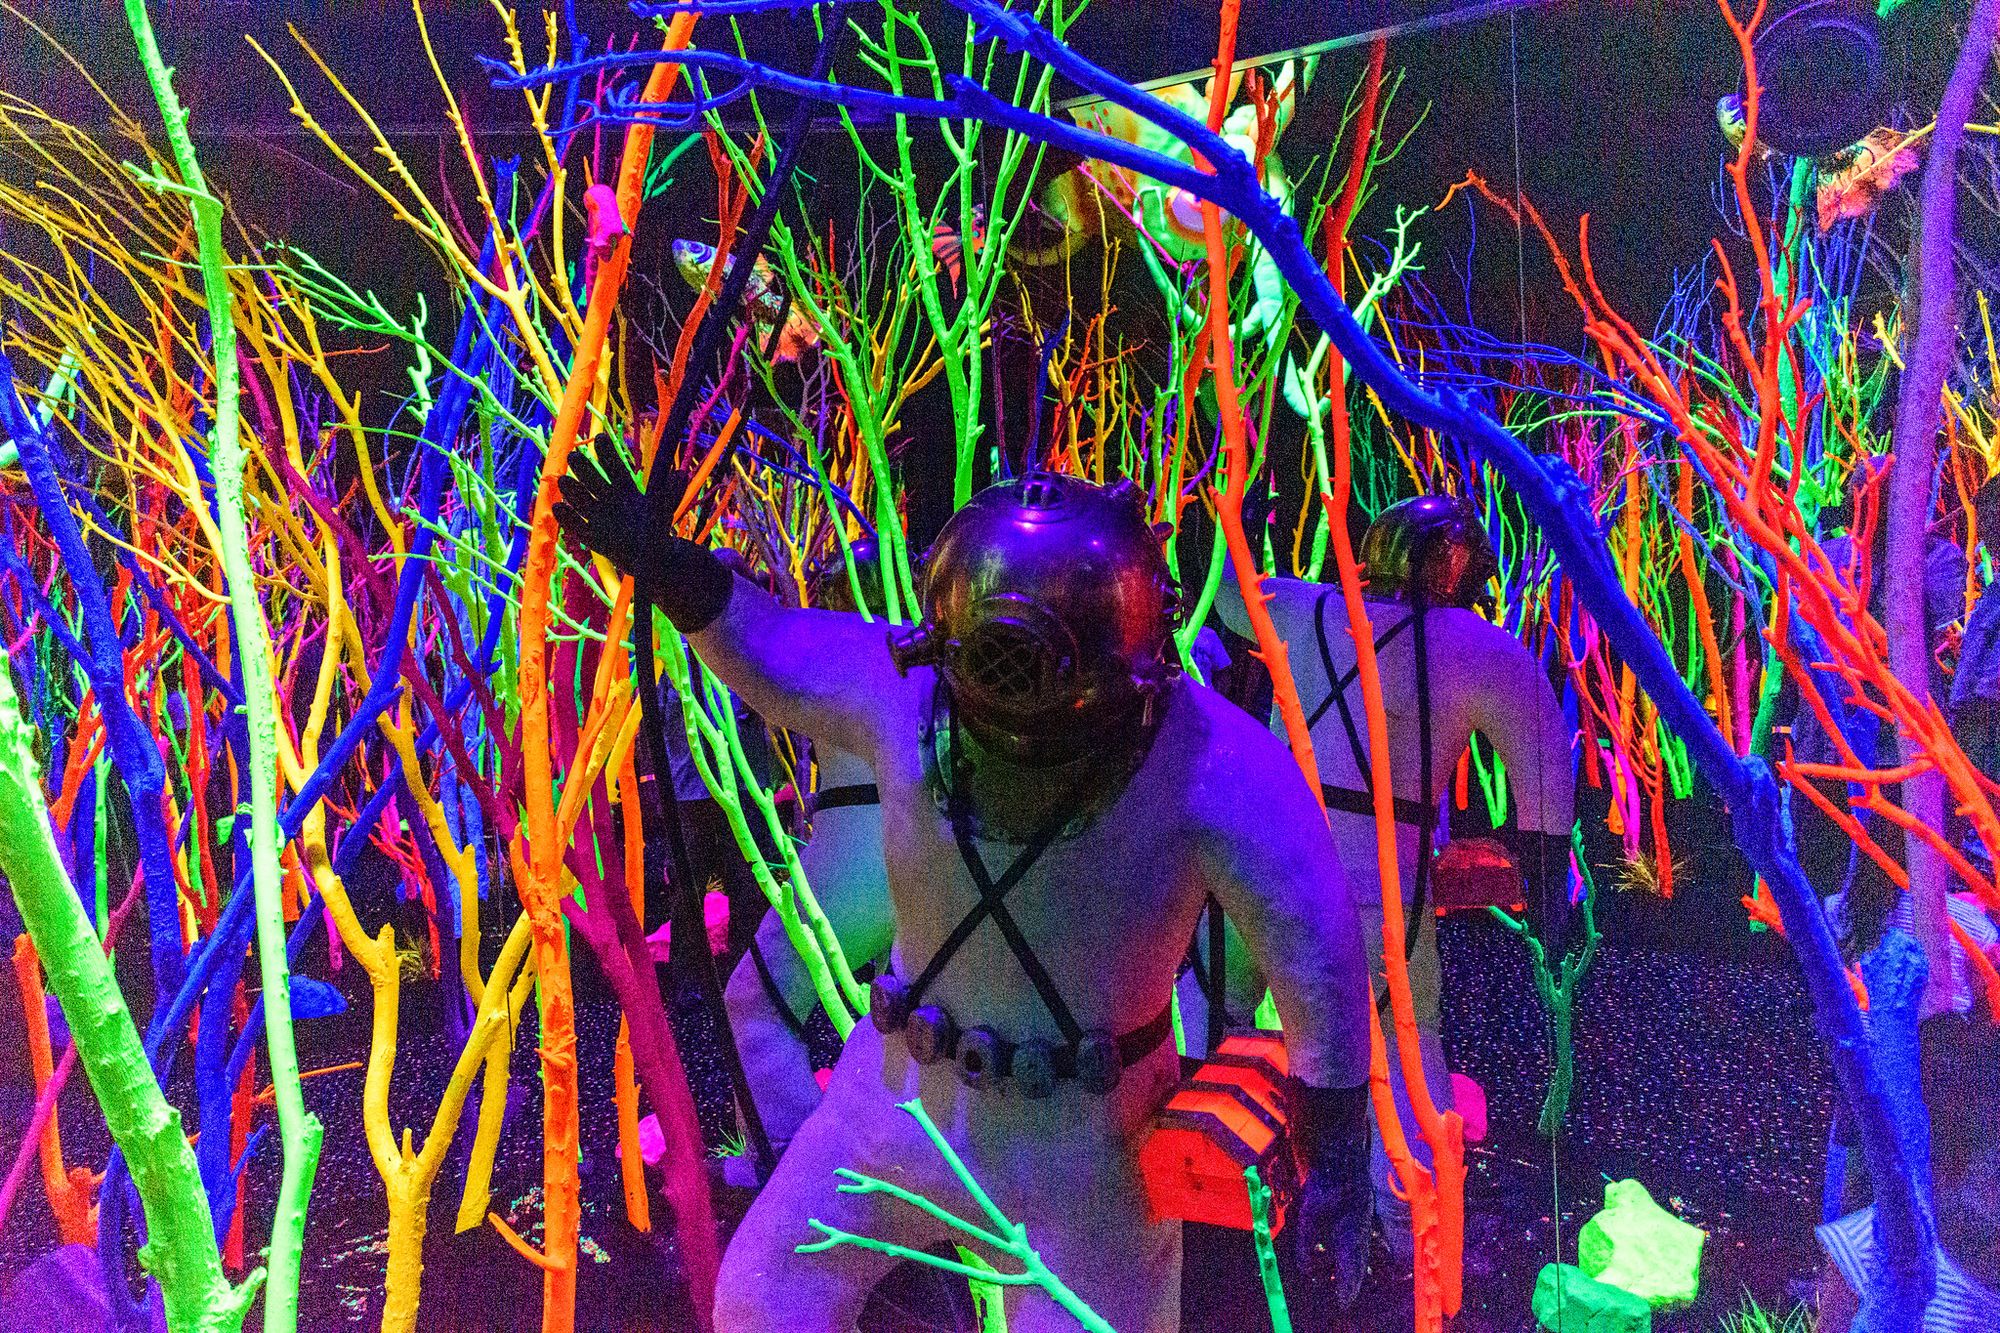 Meow Wolf art exhibitions